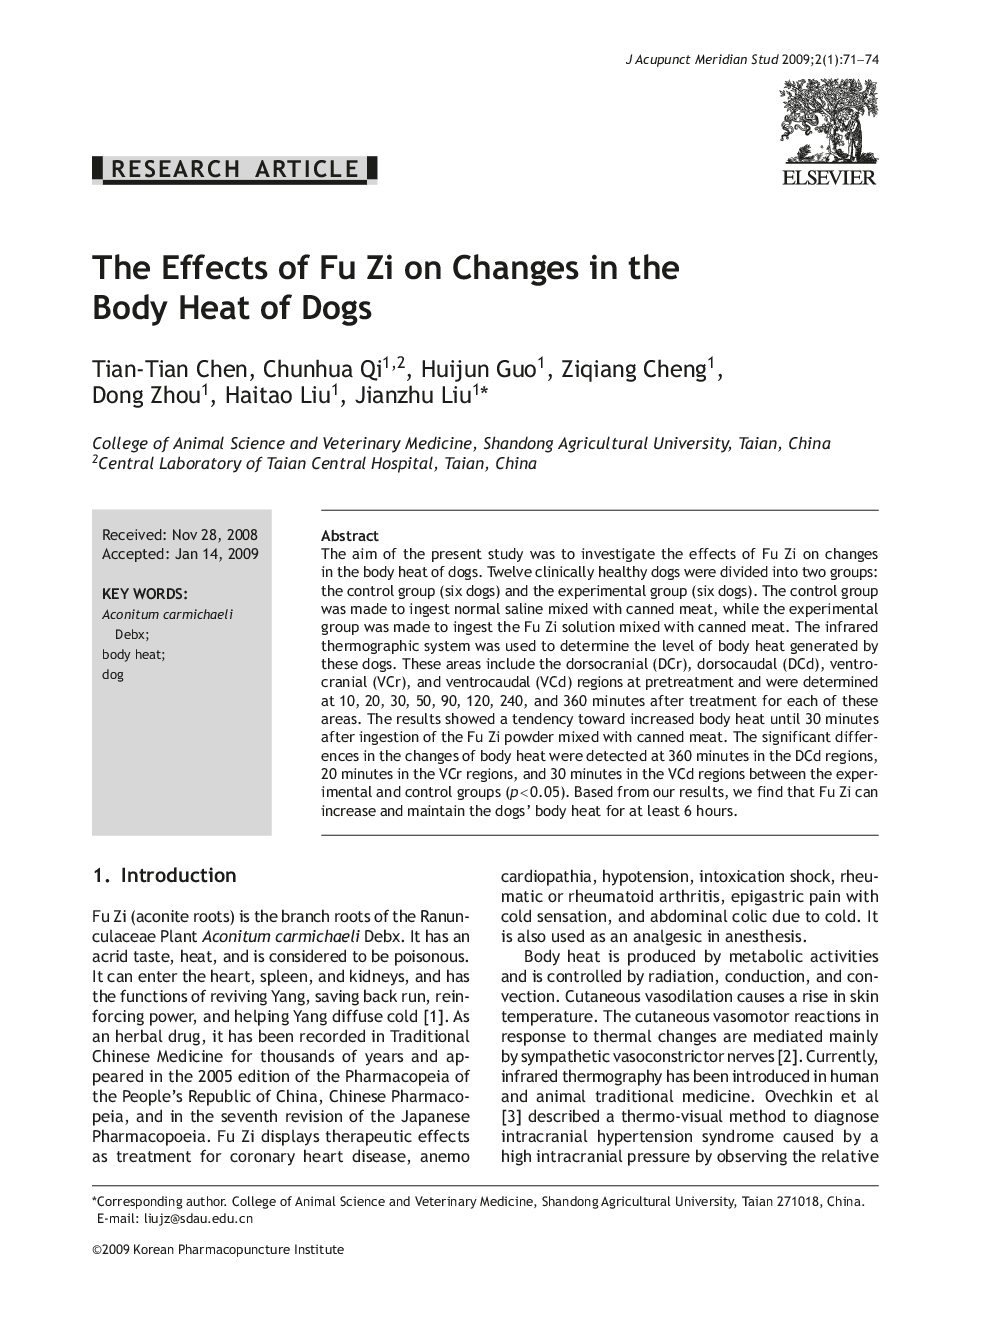 The Effects of Fu Zi on Changes in the Body Heat of Dogs